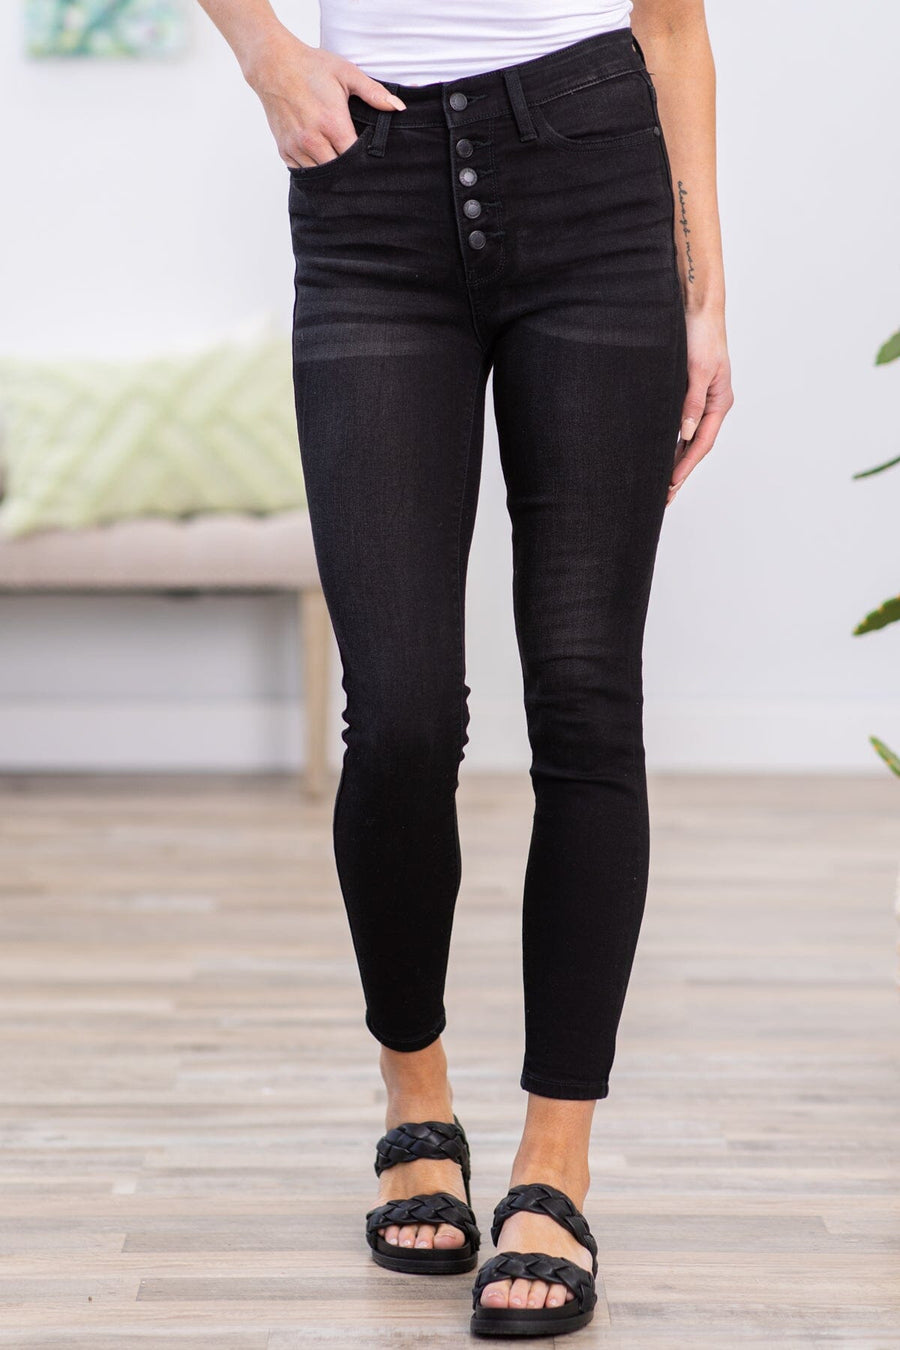 Judy Blue Black Button Fly Jeans - Filly Flair